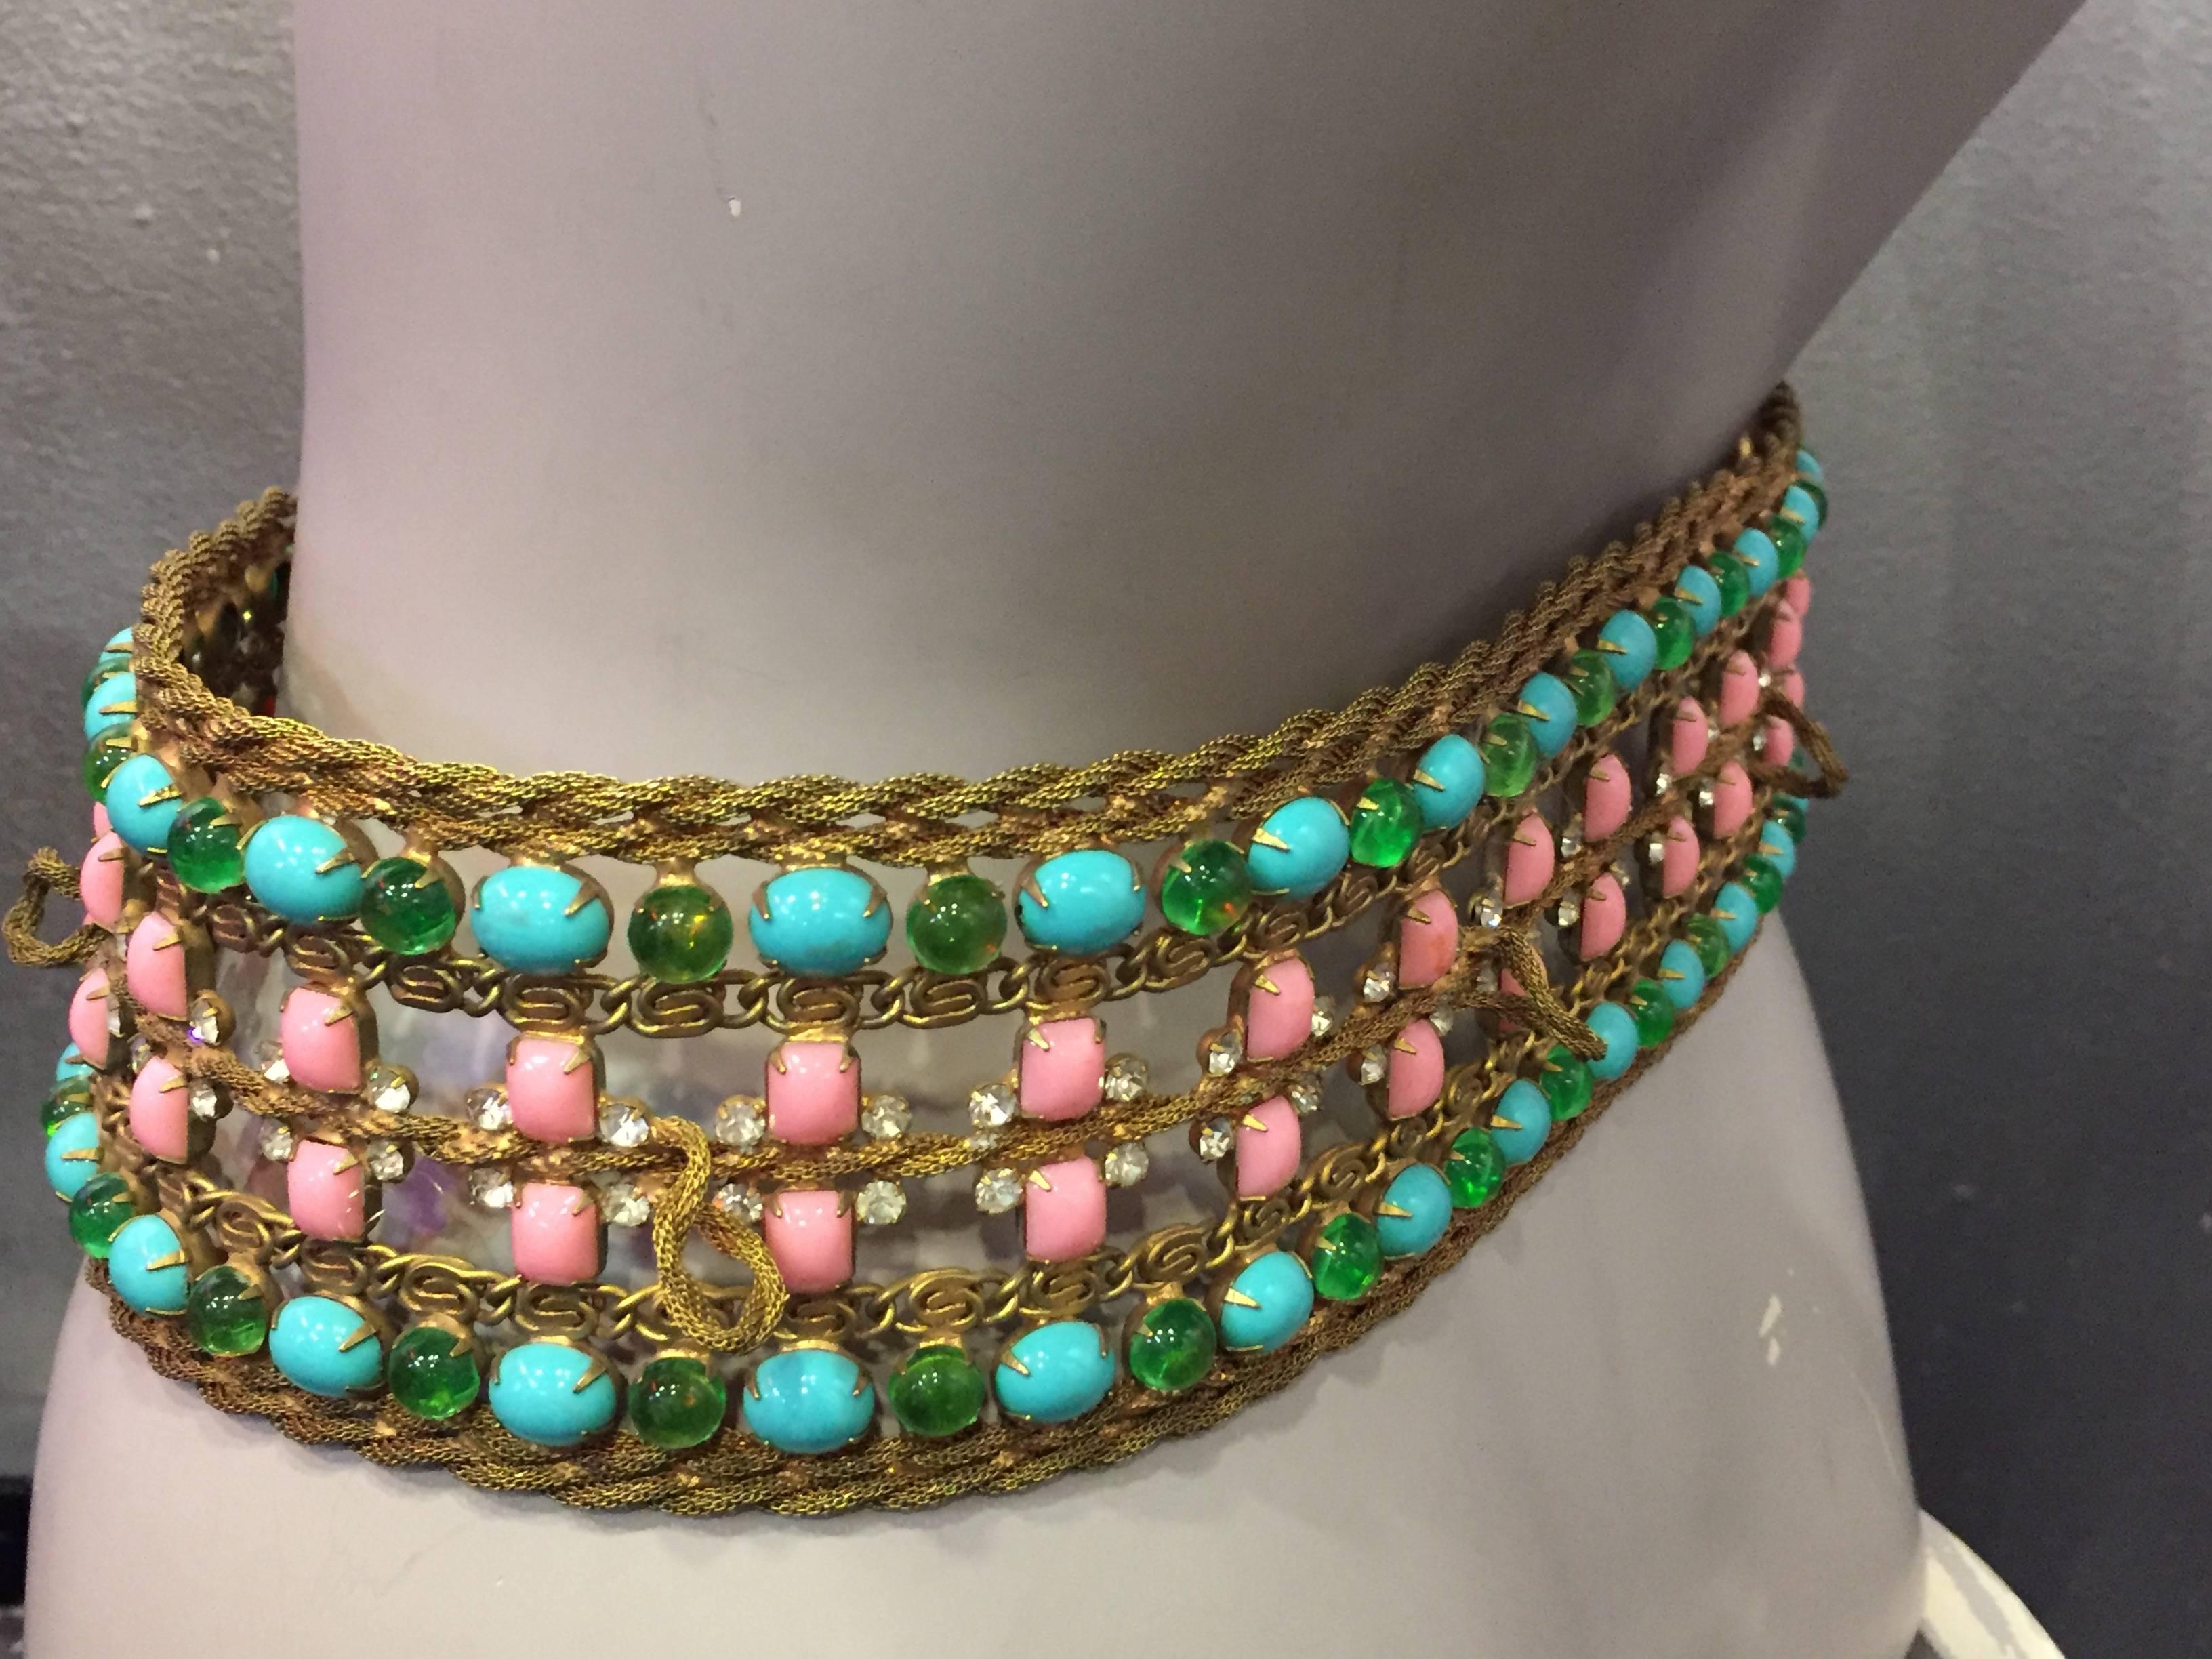 A fabulous and rare 1960s Kenneth Jay Lane gold-tone mesh and cabochon glass jewel belt. Jewels are all prong set and are in pink, emerald and turquoise.  One turquoise cabochon is missing. Belt measures 3